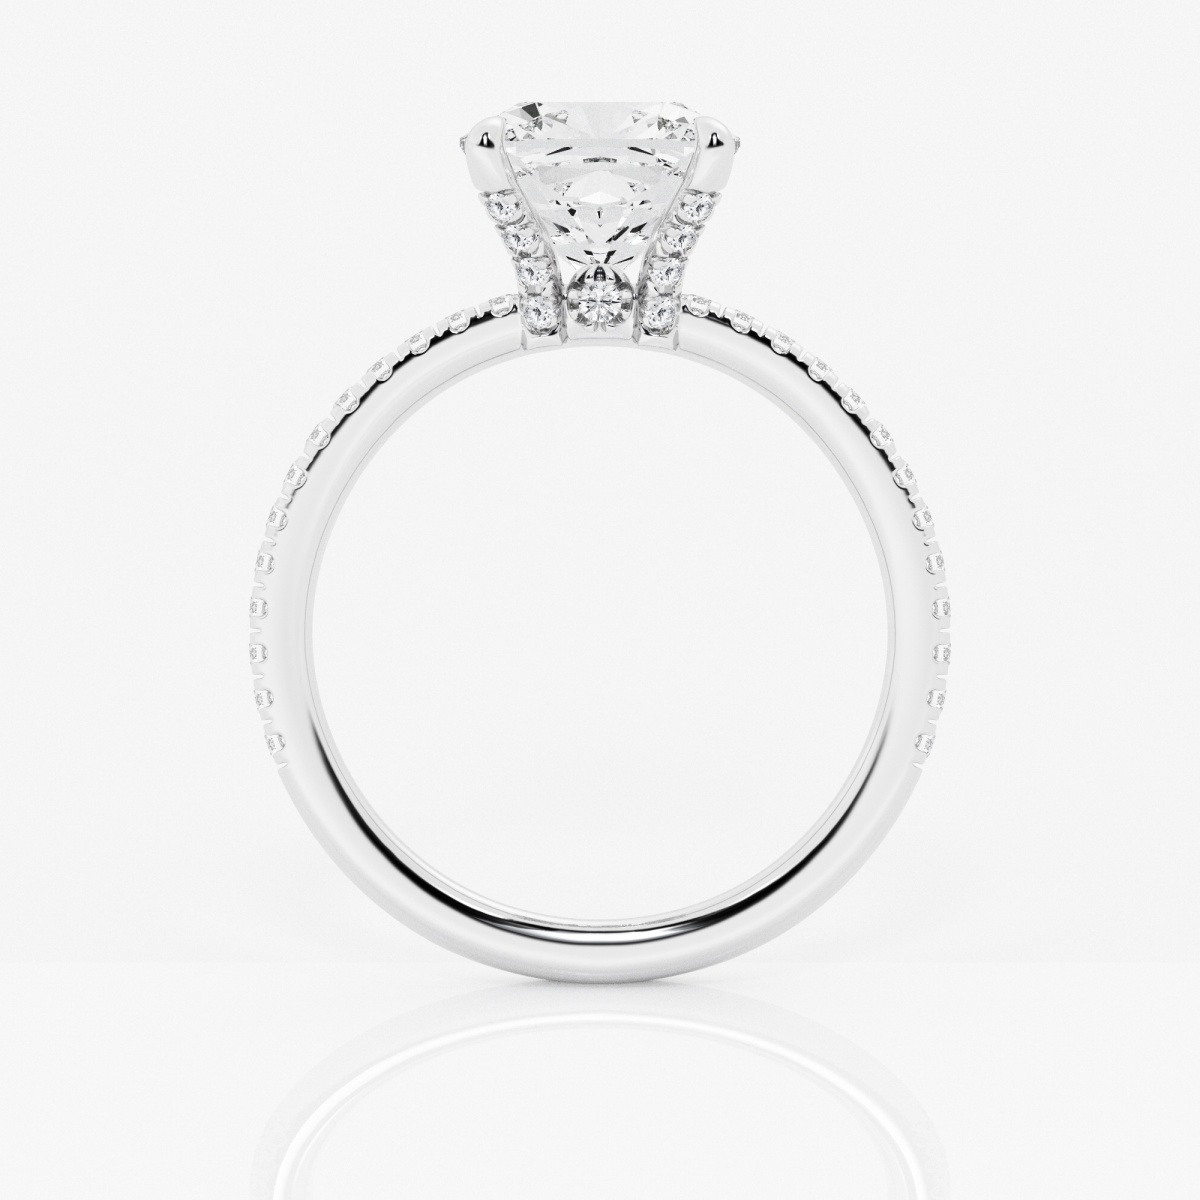 Additional Image 1 for  3 1/3 ctw Cushion Lab Grown Diamond Petite Pave Engagement Ring with Side Accents